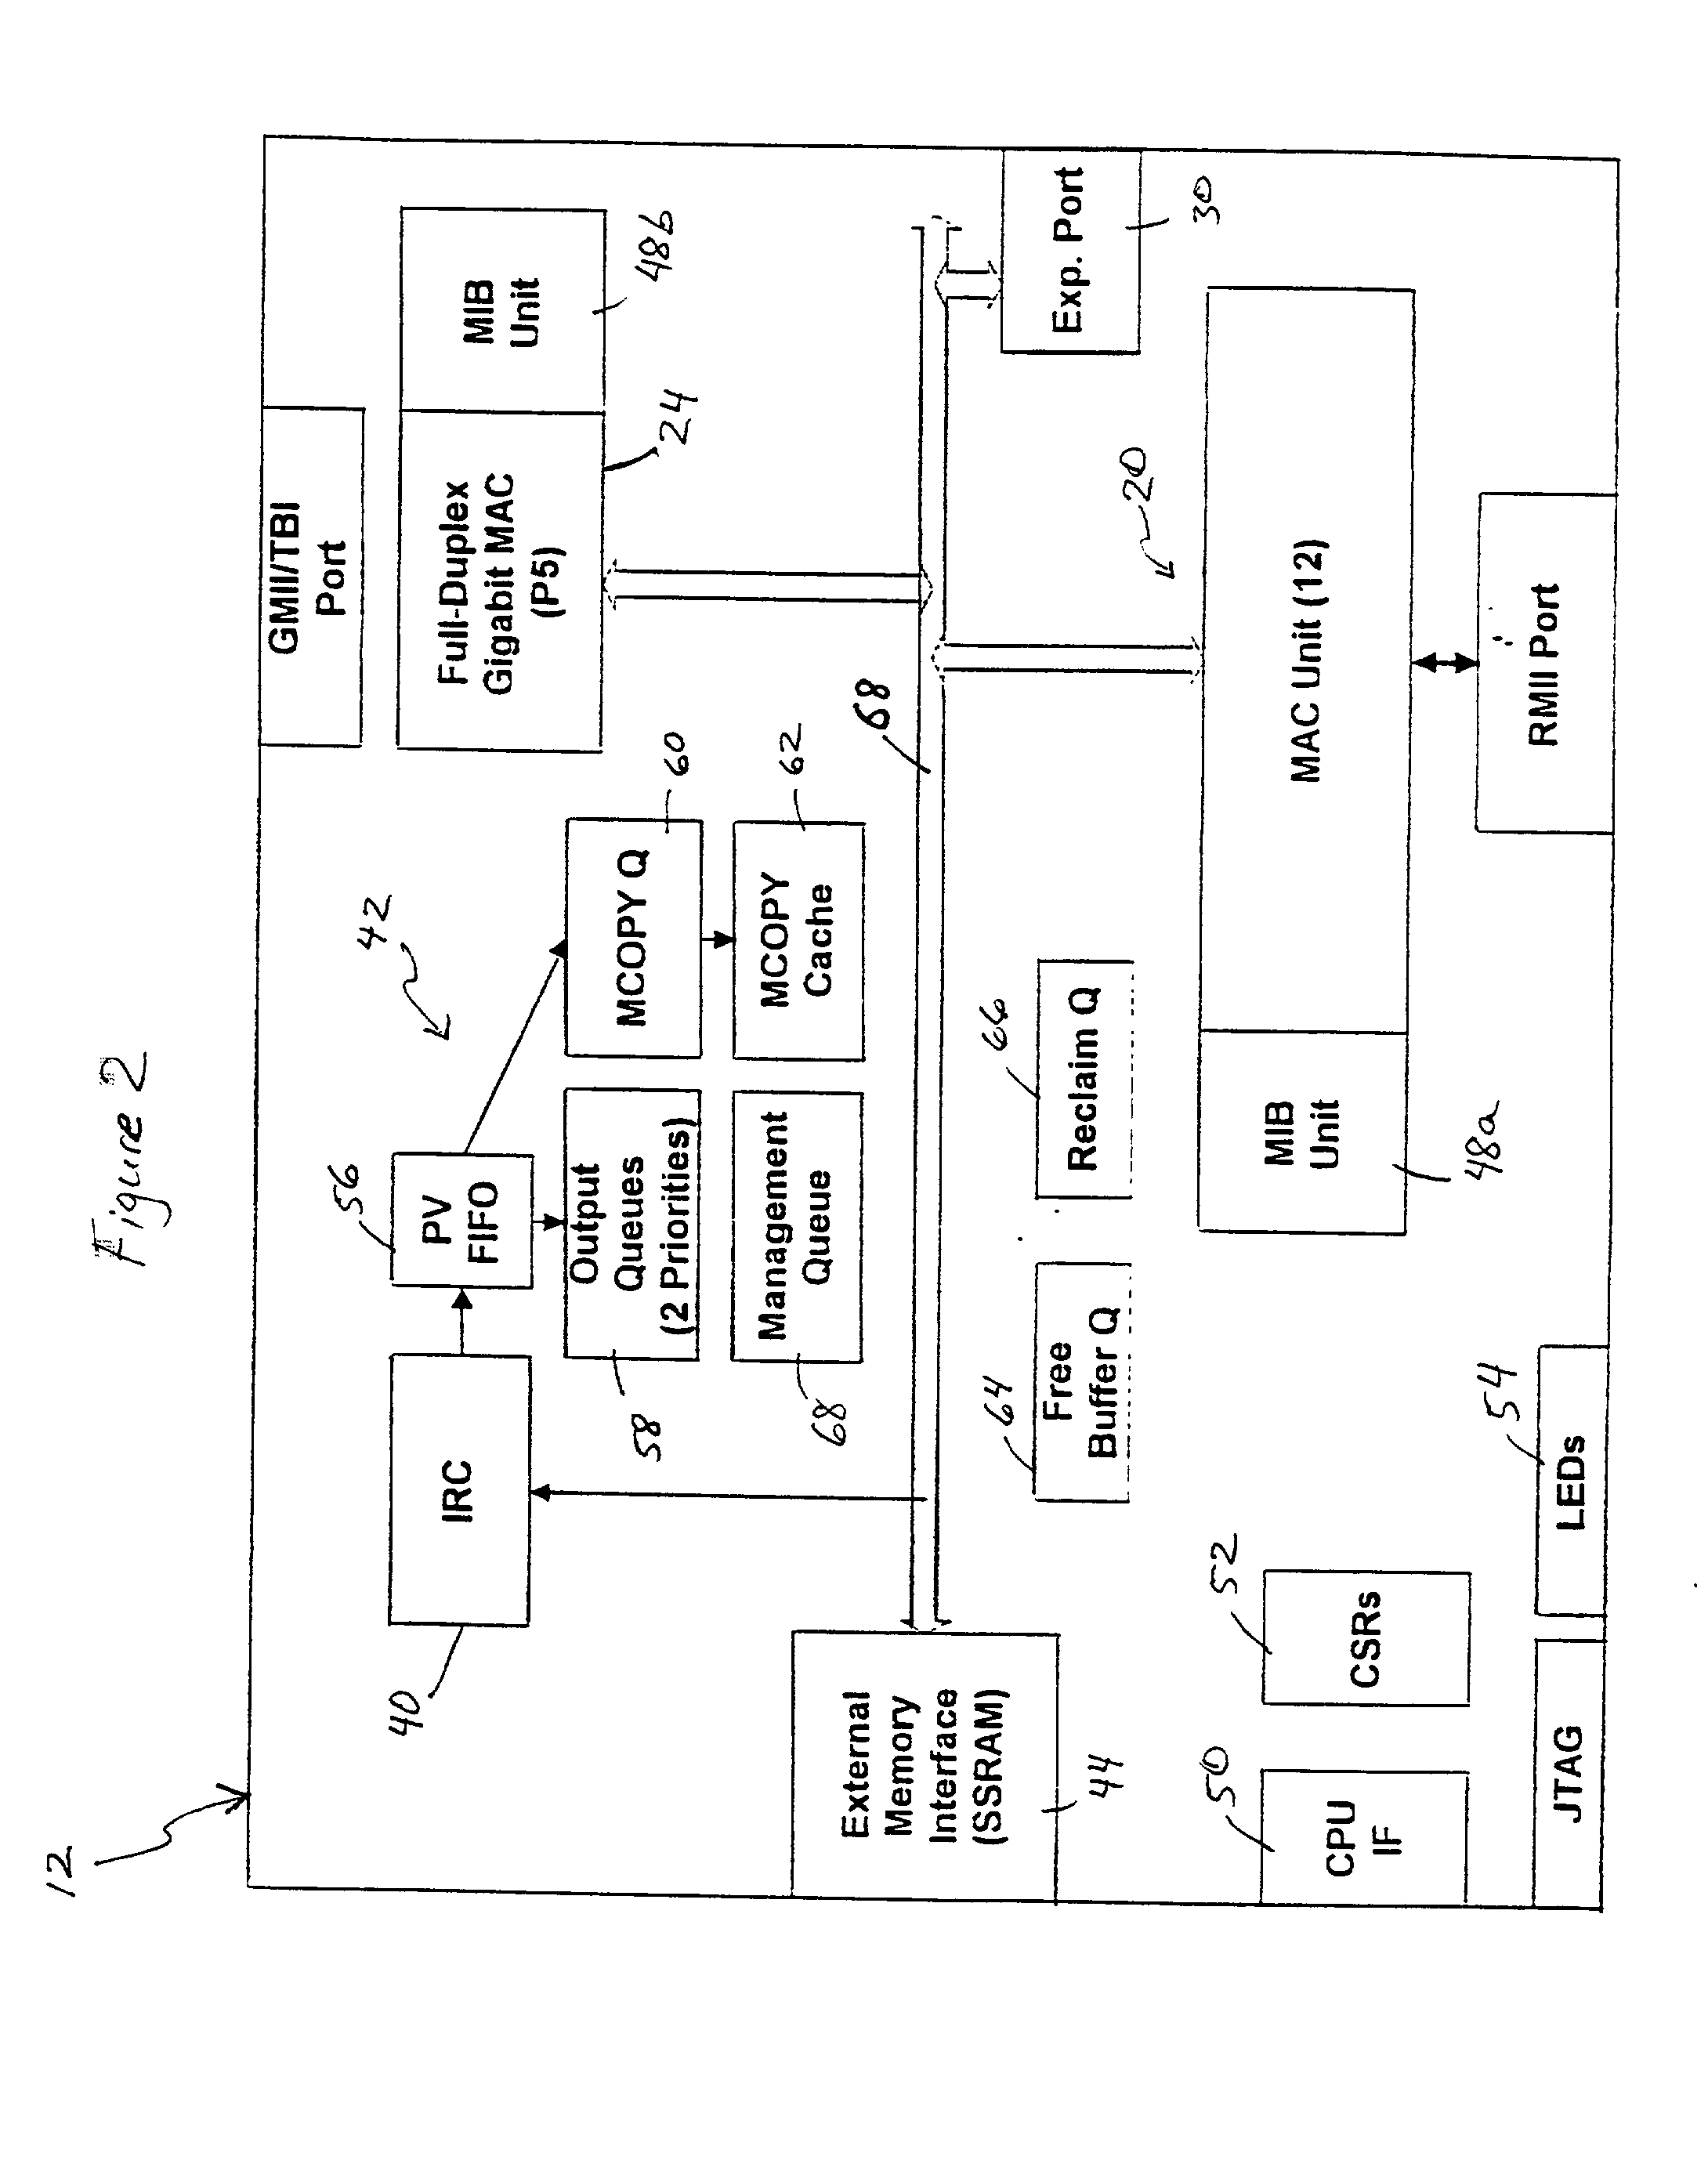 Apparatus and method in a network switch port for transferring data between buffer memory and transmit and receive state machines according to a prescribed interface protocol